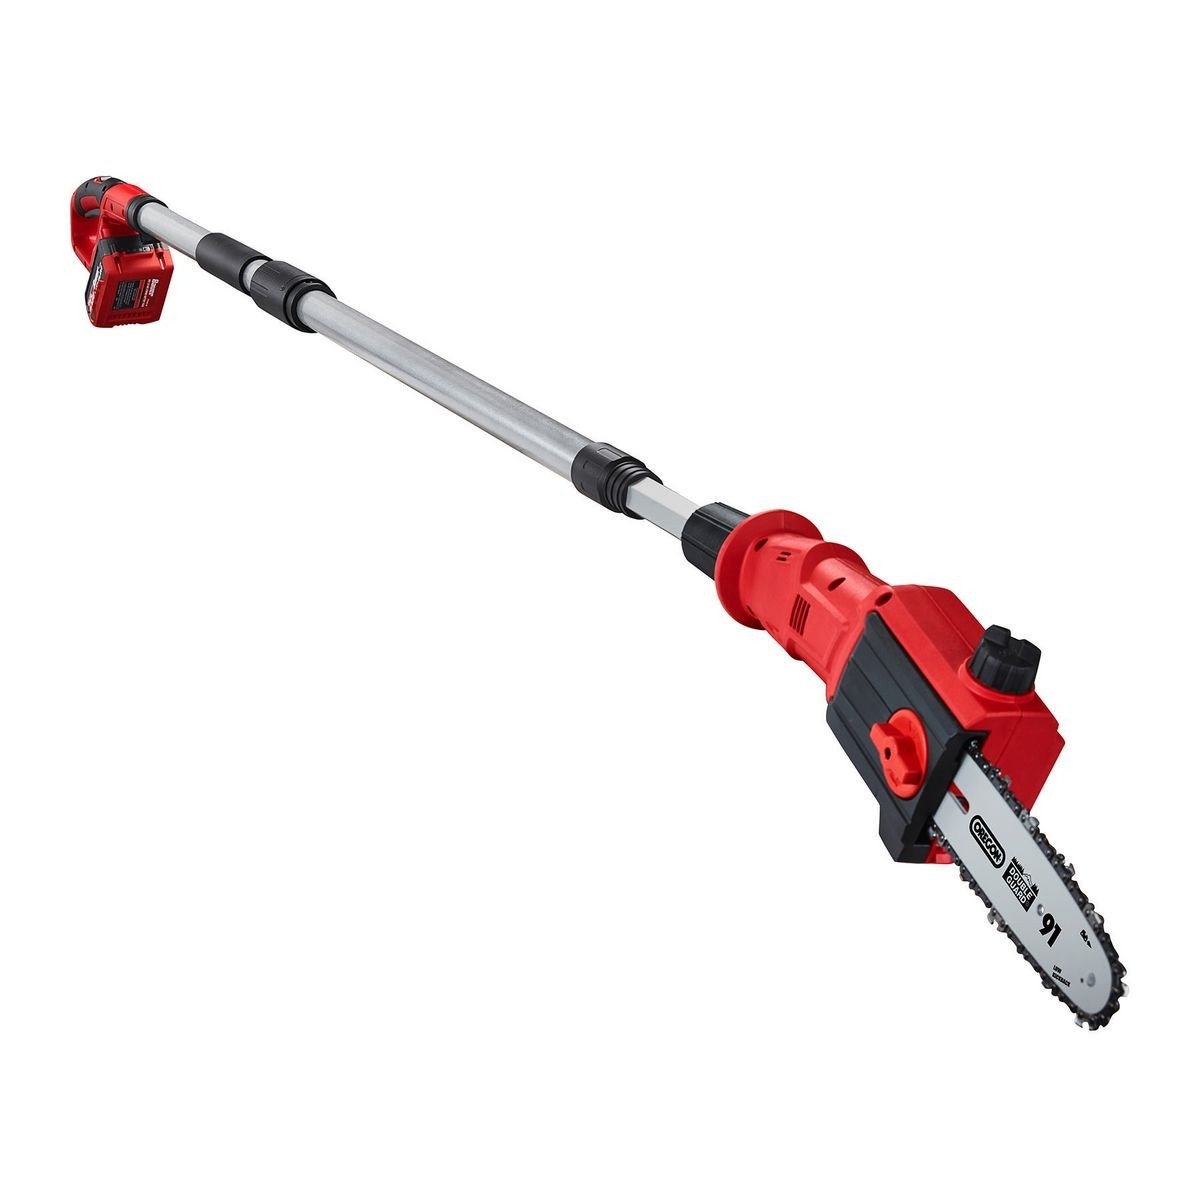 BAUER 20V Hypermax™ Lithium Cordless Pole Saw - Tool Only - Circular Saws